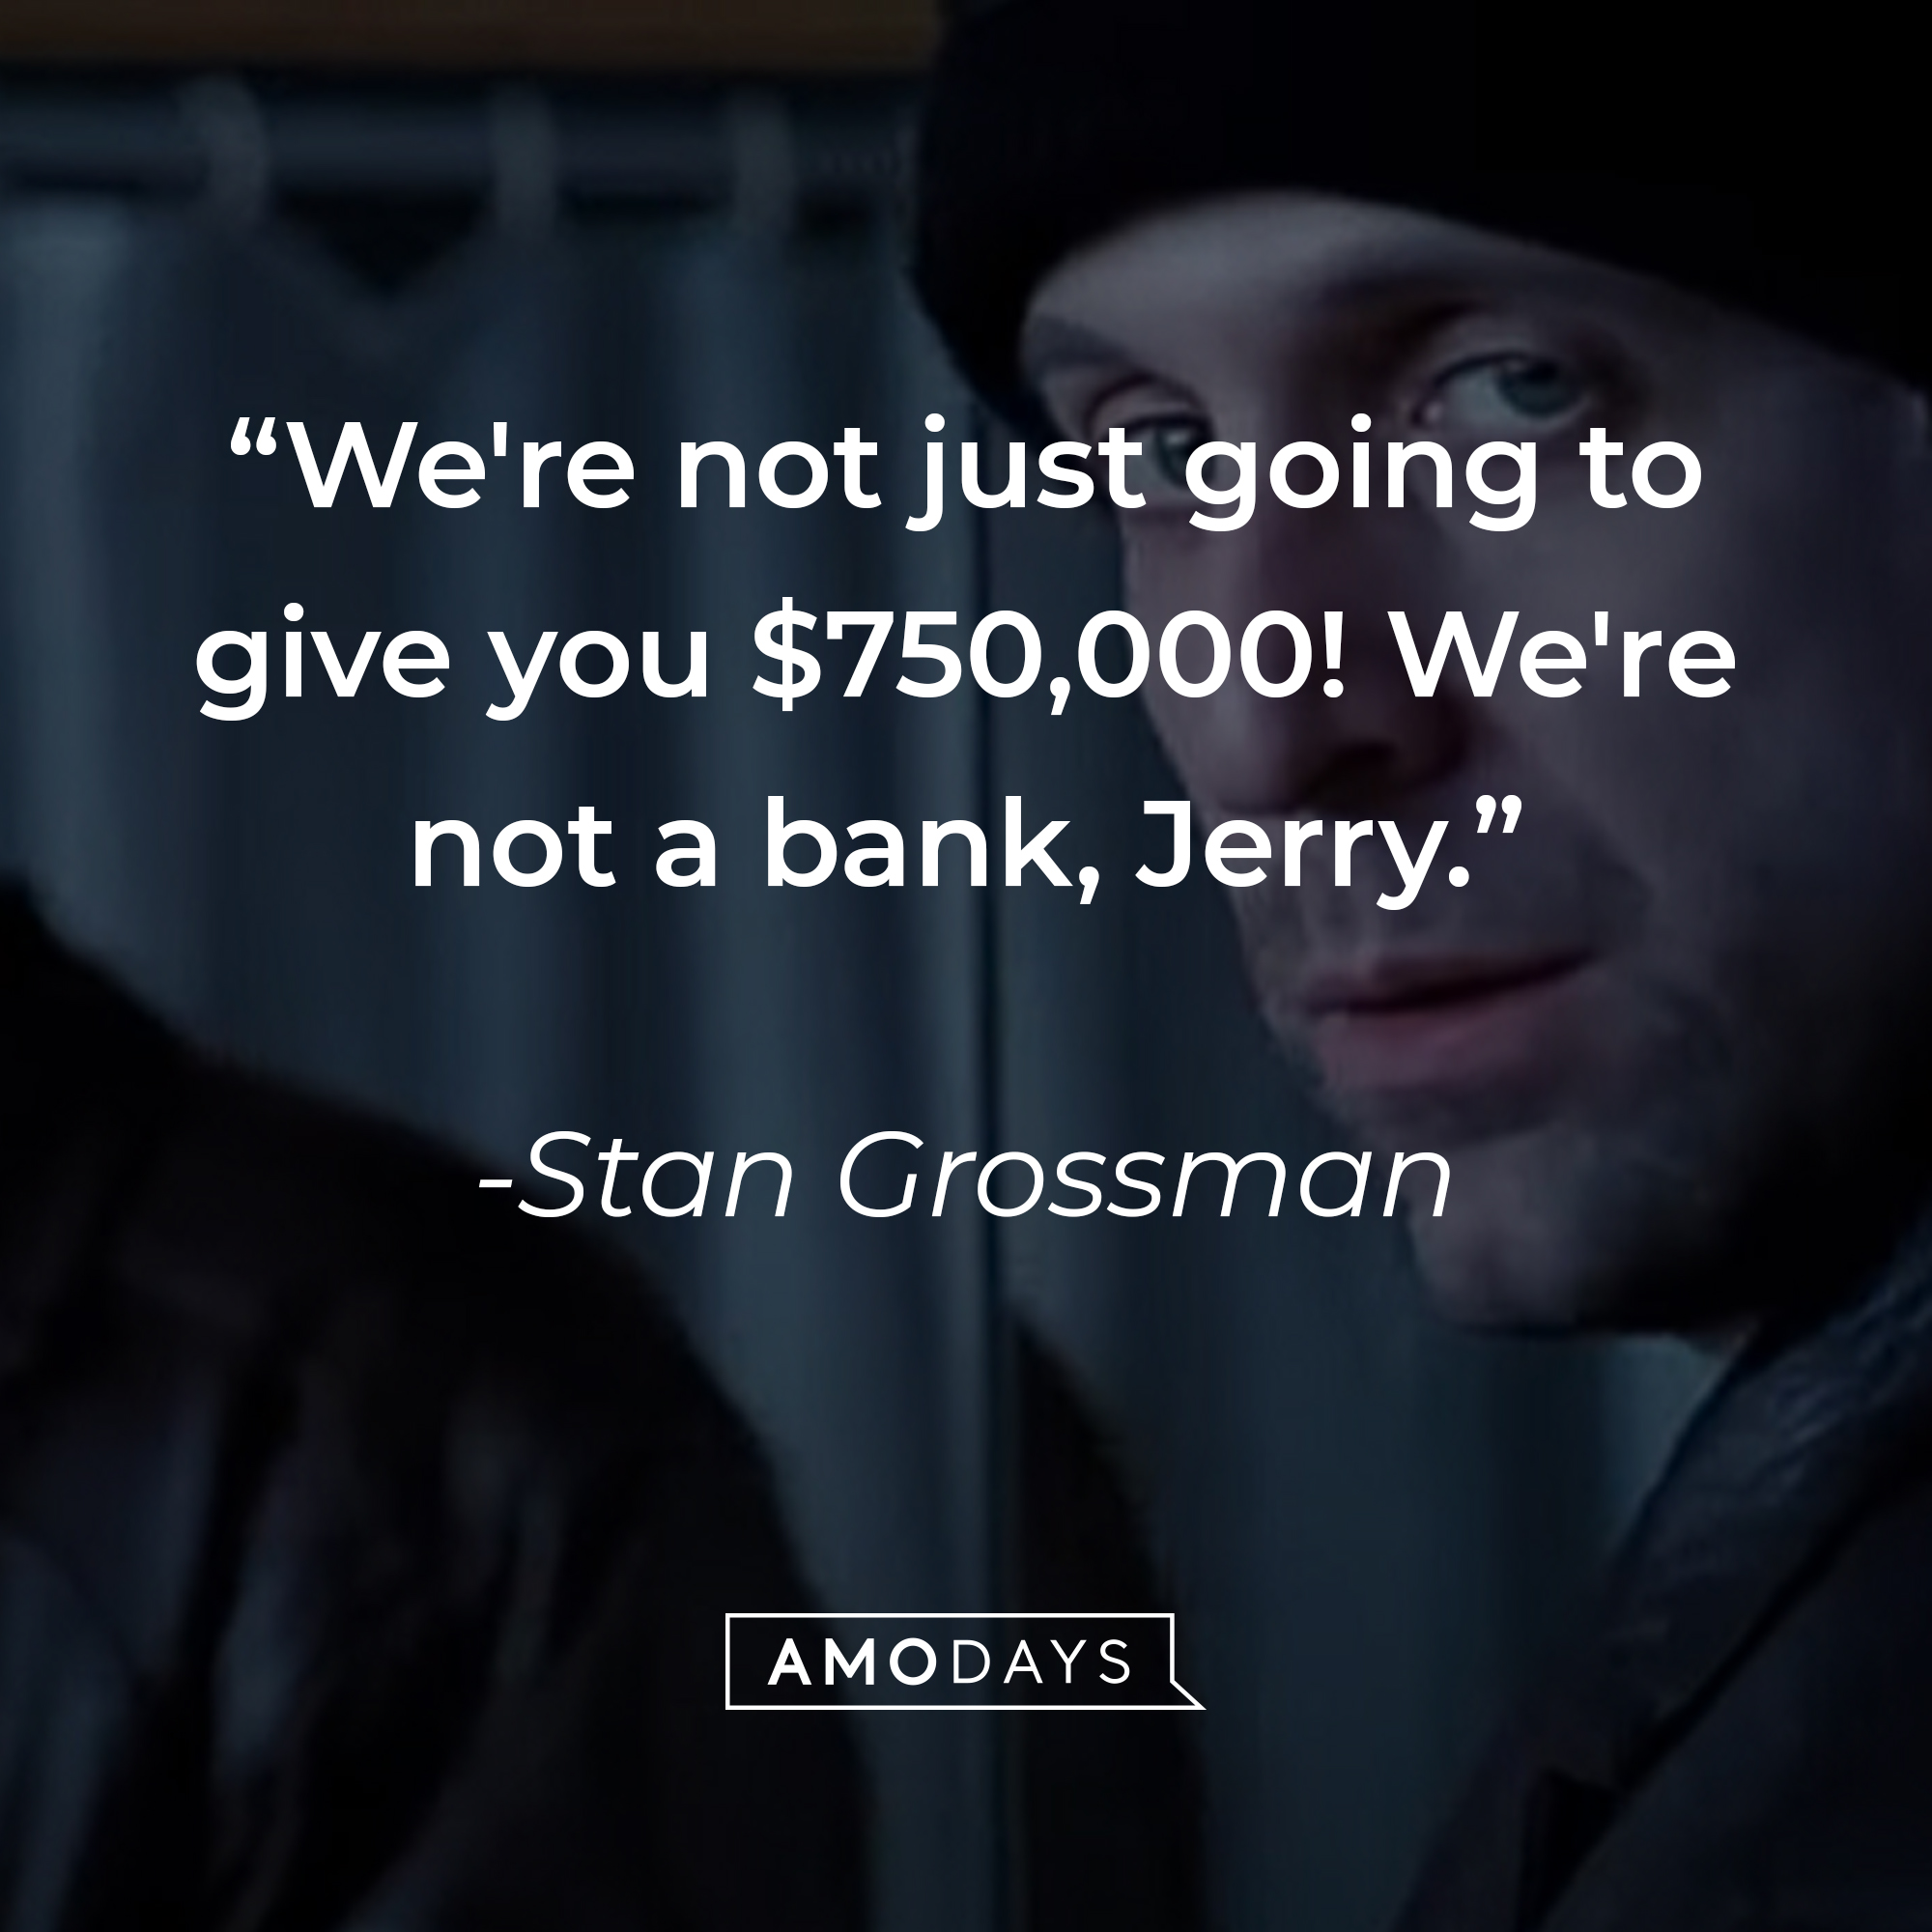 Stan Grossman's quote: “We're not just going to give you $750,000! We're not a bank, Jerry." | Source: youtube.com/MGMStudios